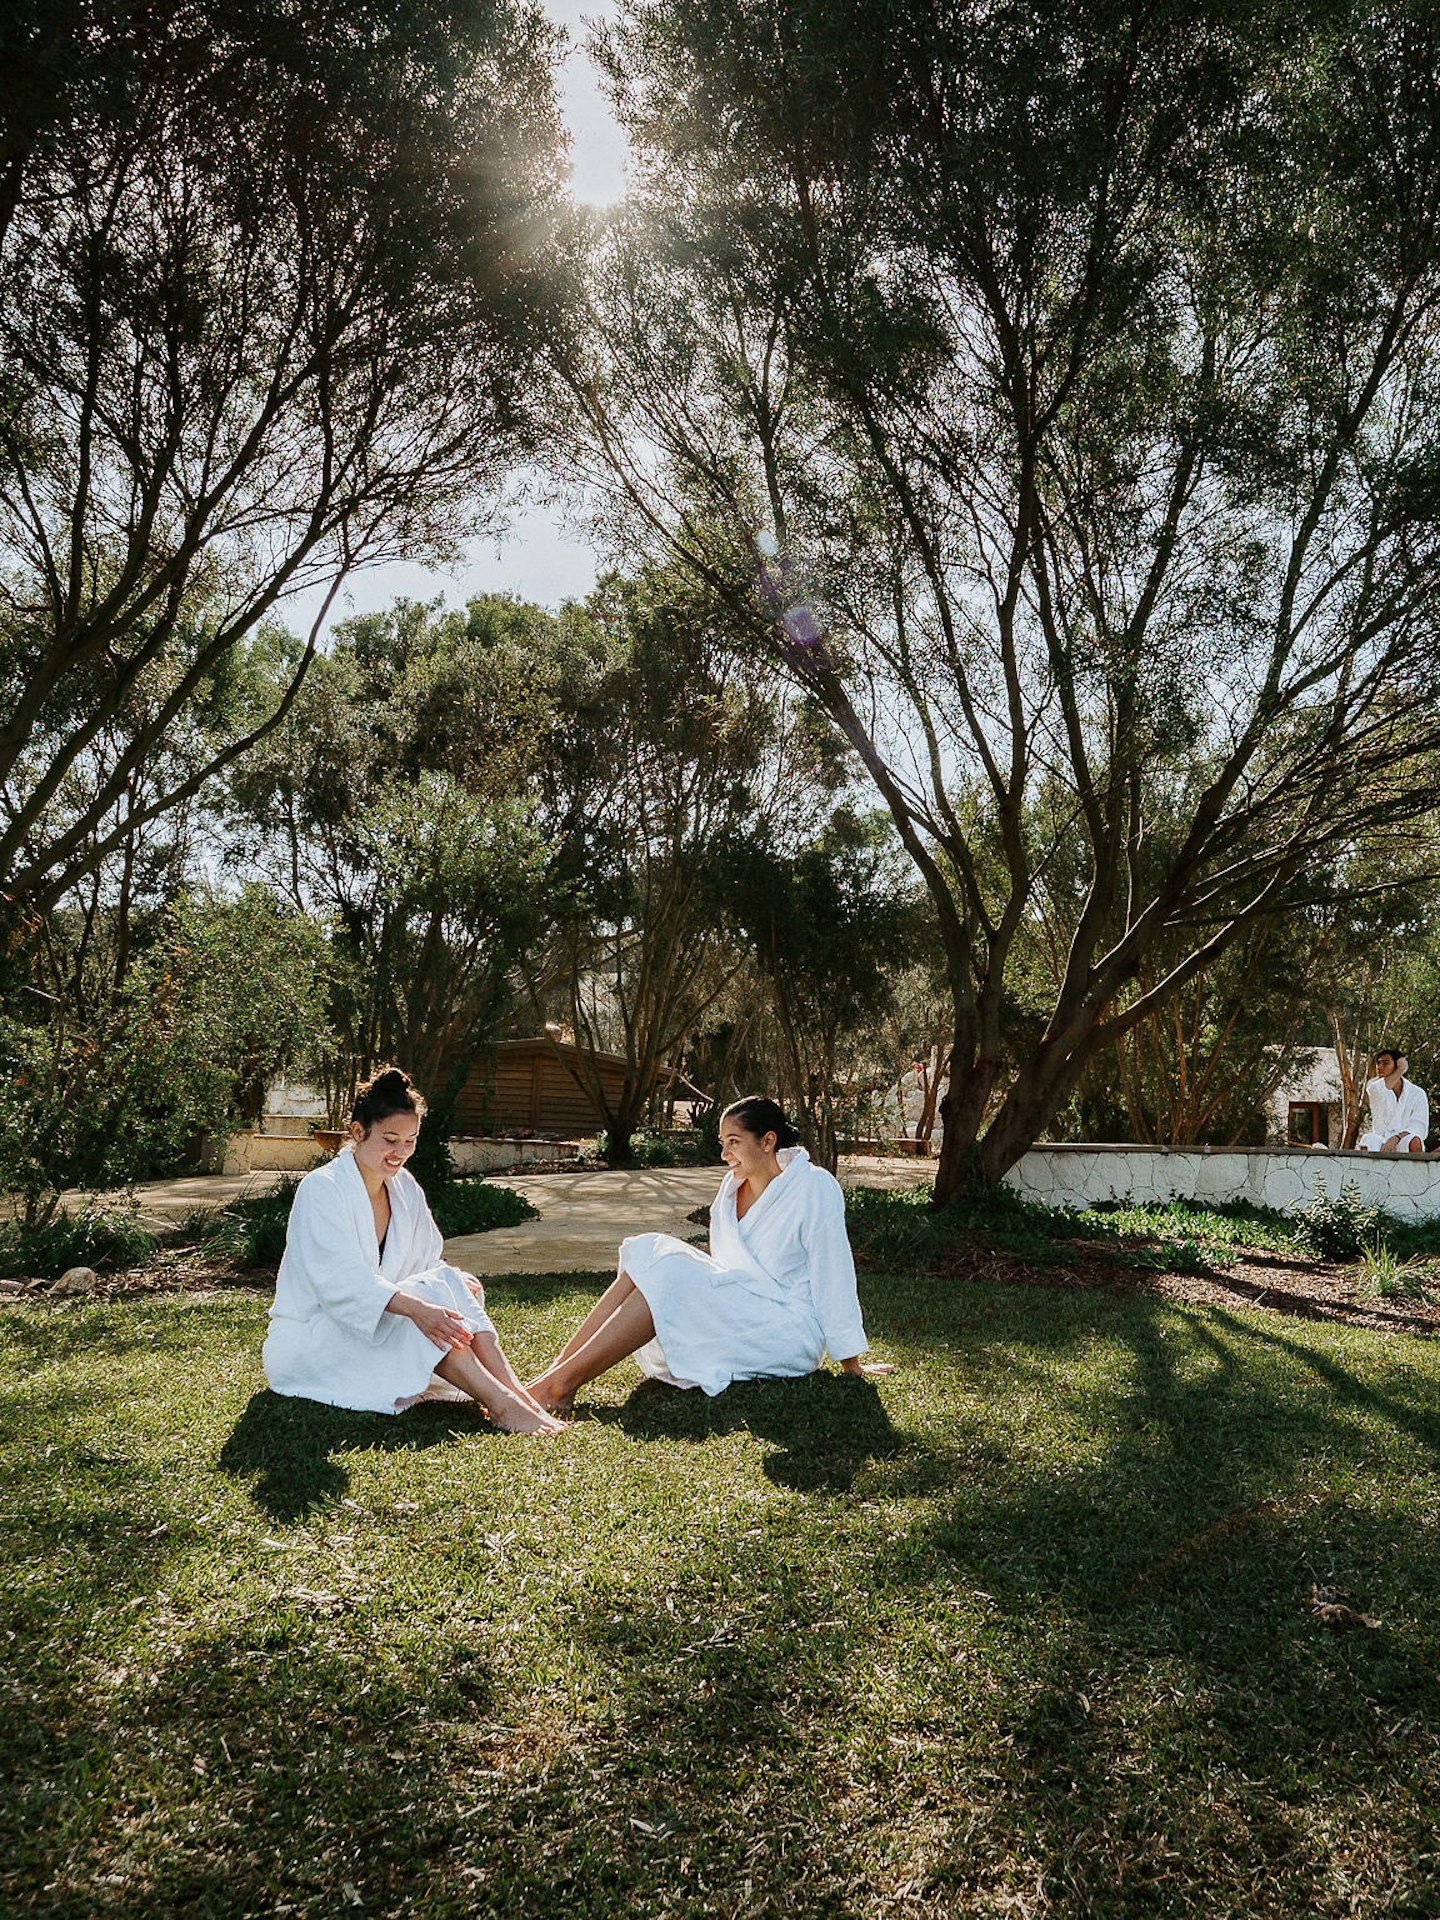 two ladies in robes sitting on grass in natural surrounds